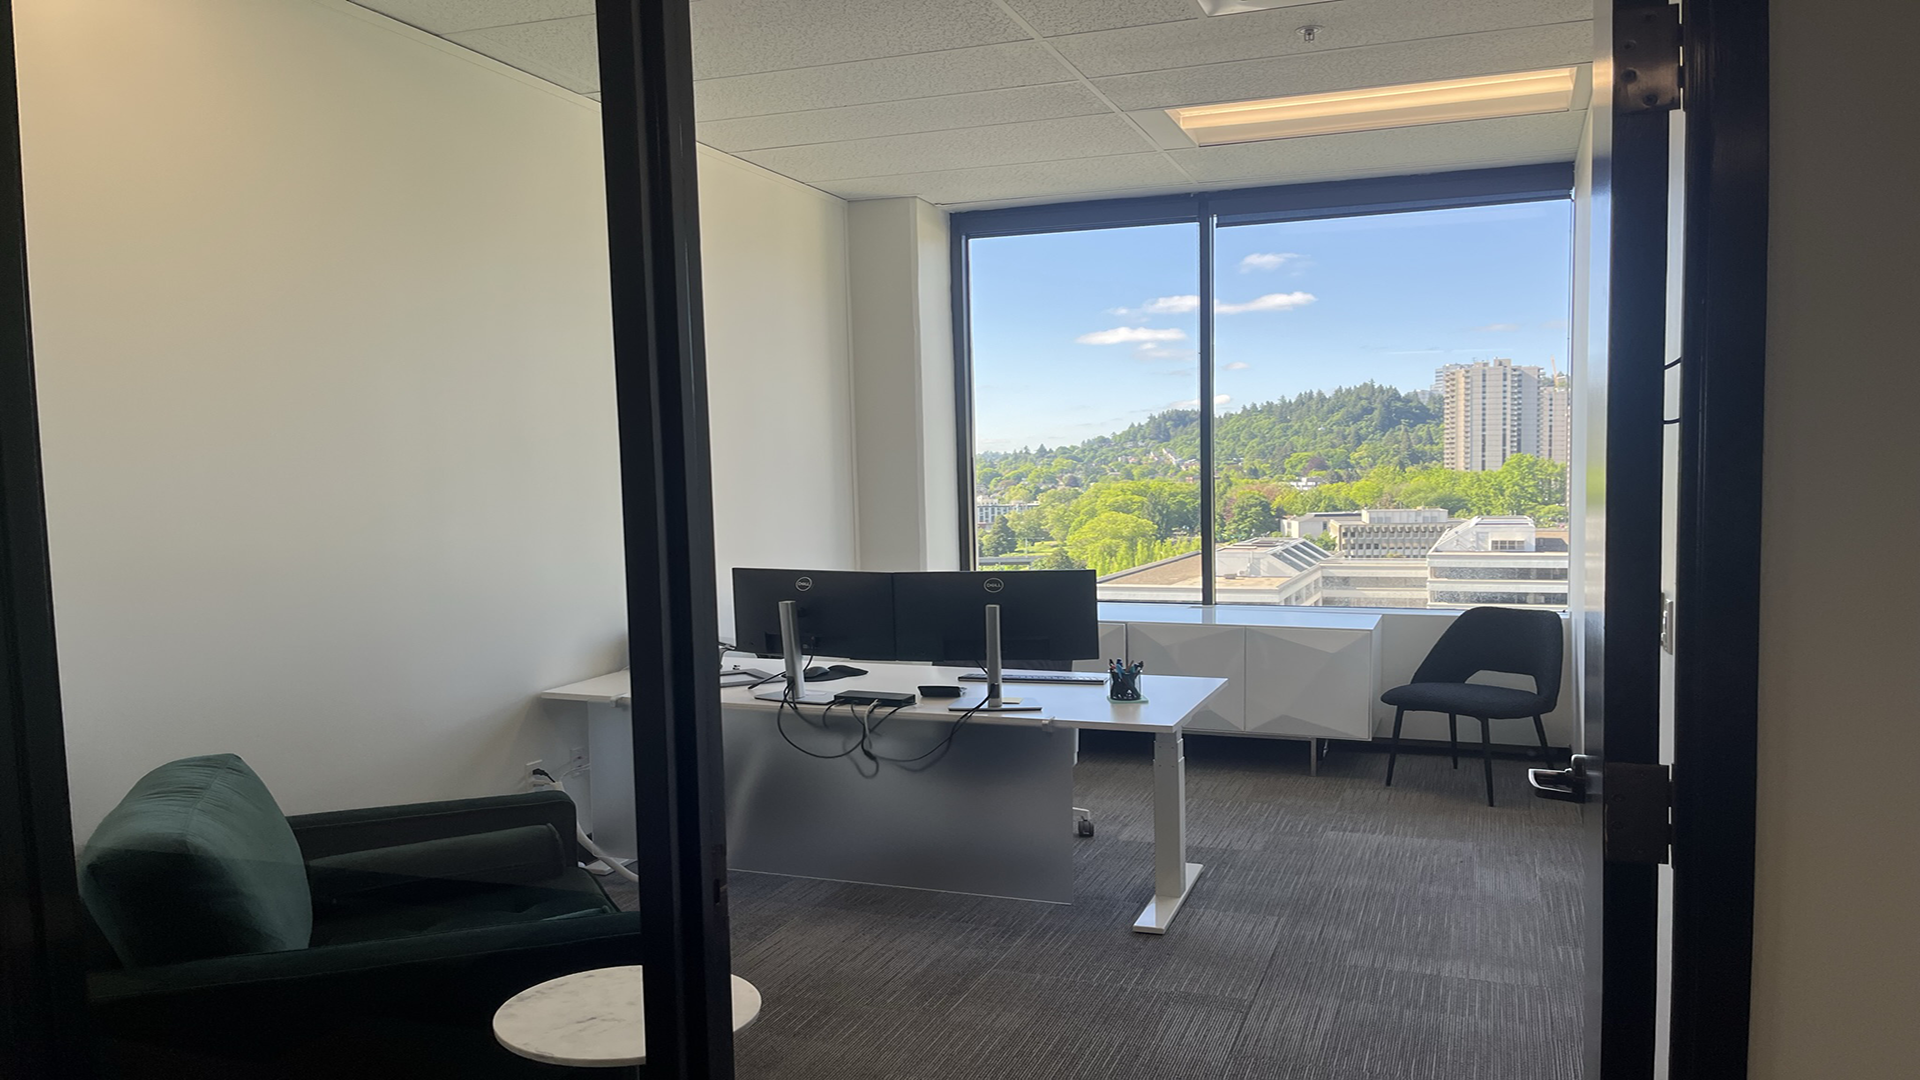 Sublease at 1500 SW 1st Ave, Portland, OR